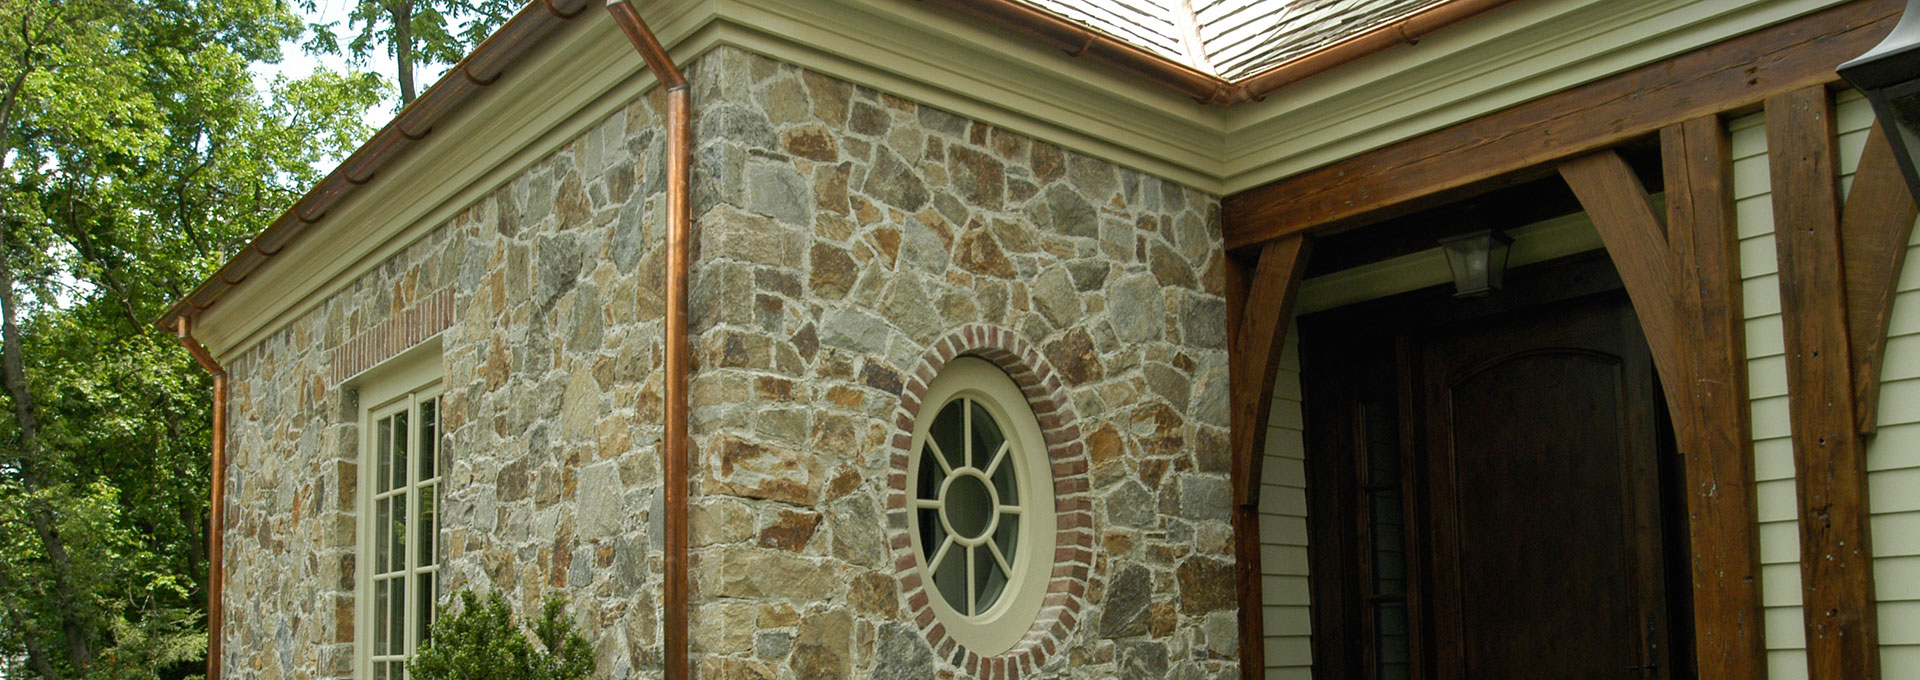 Building Stone Materials for Exterior Surfaces provided at Connecticut Stone